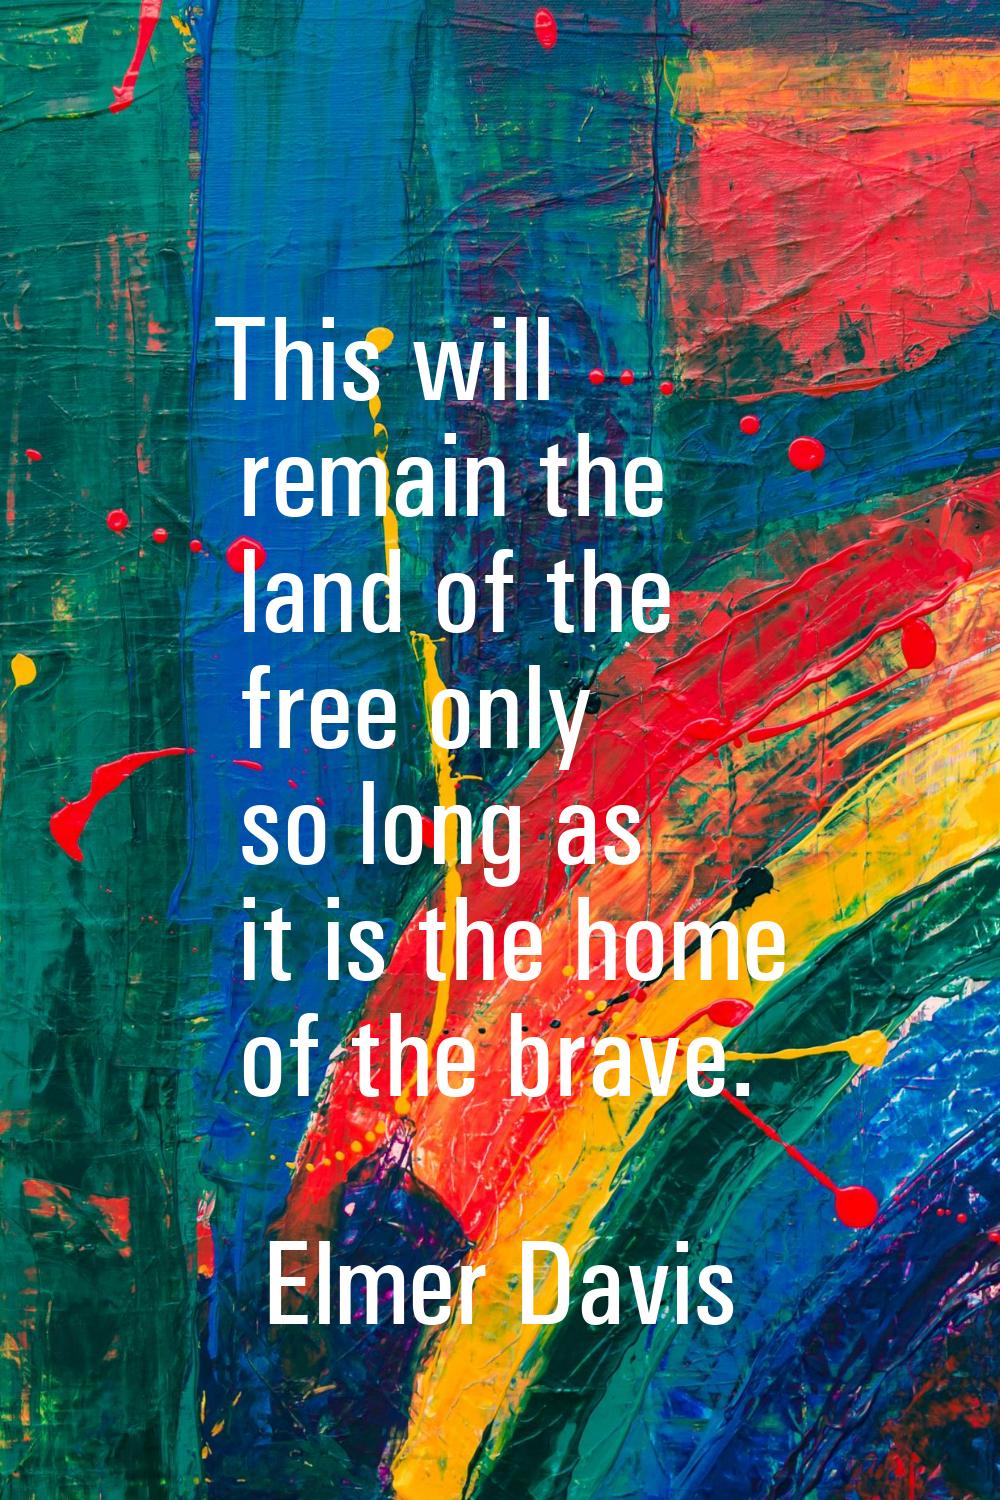 This will remain the land of the free only so long as it is the home of the brave.